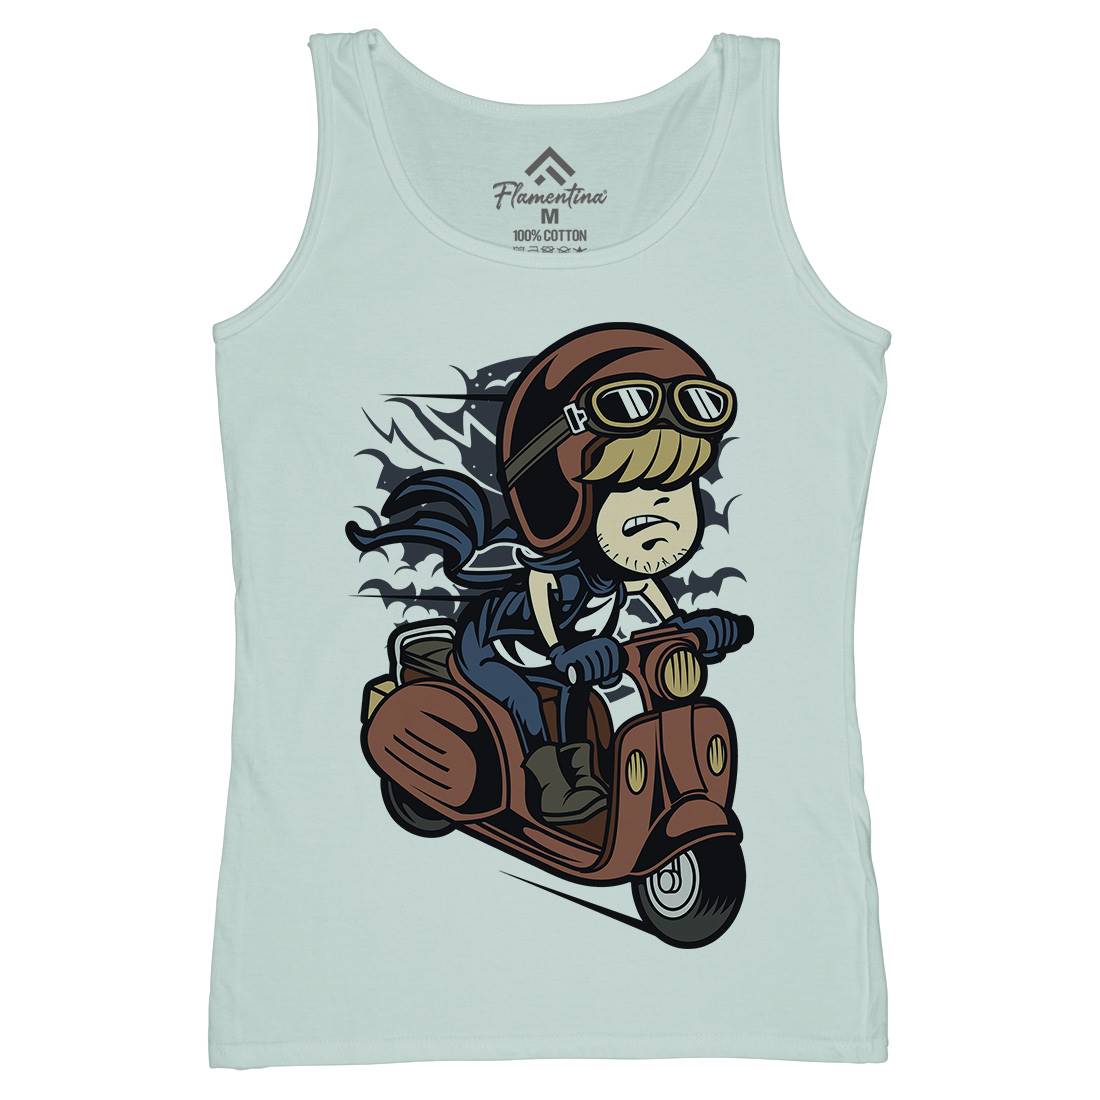 Scooter Rider Kid Womens Organic Tank Top Vest Motorcycles C436